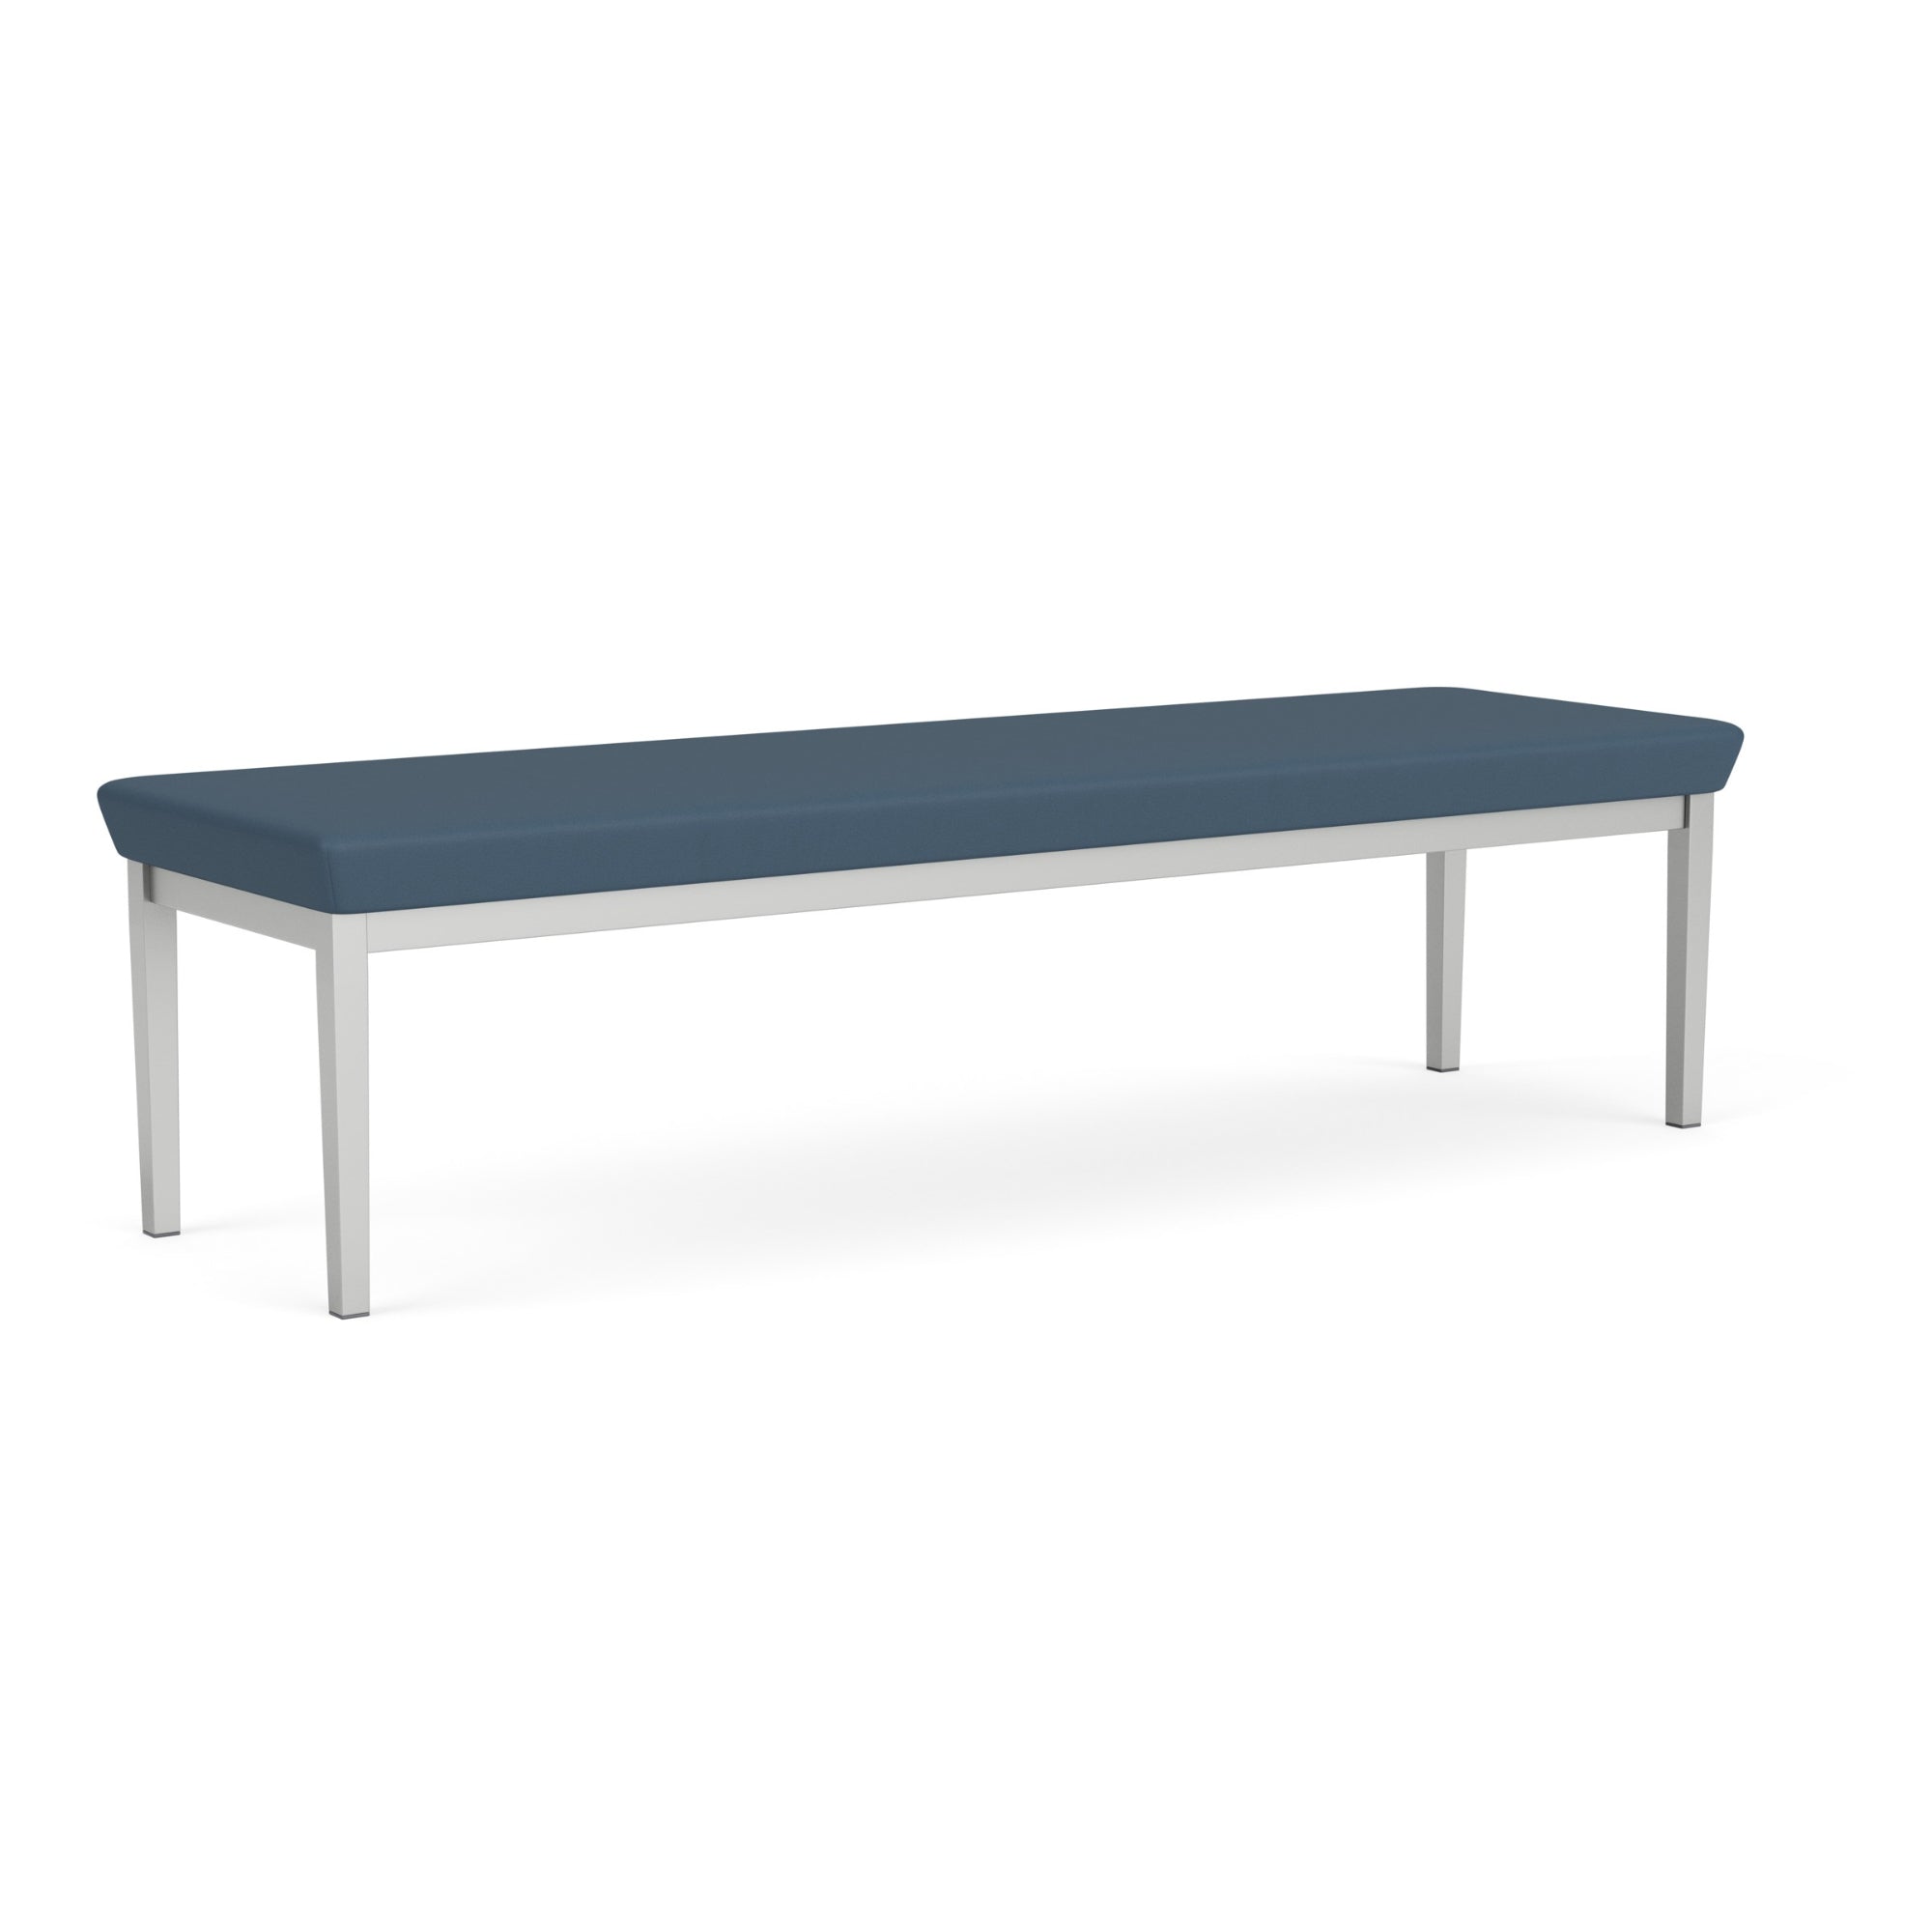 Lenox Steel Collection Reception Seating, 3 Seat Bench, Standard Fabric Upholstery, FREE SHIPPING